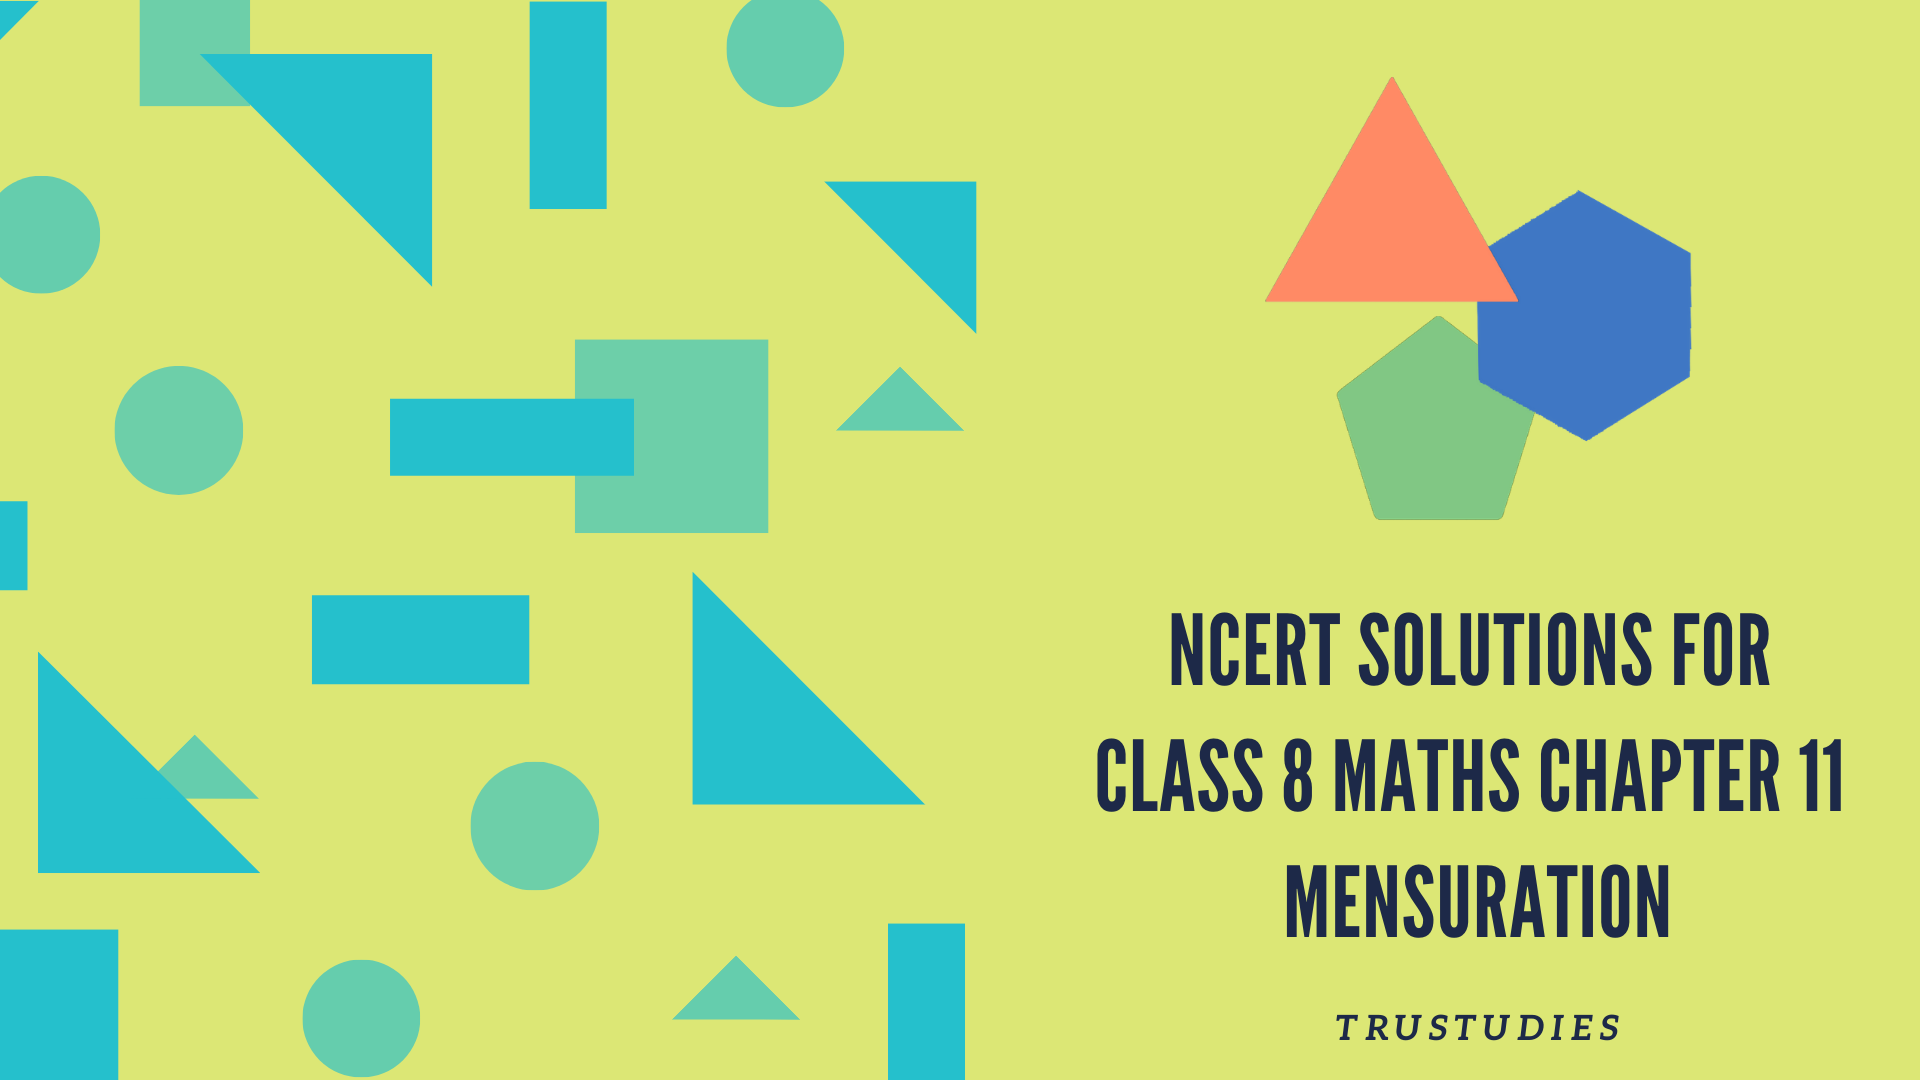 NCERT solutions for class 8 maths chapter 11 mensuration banner image